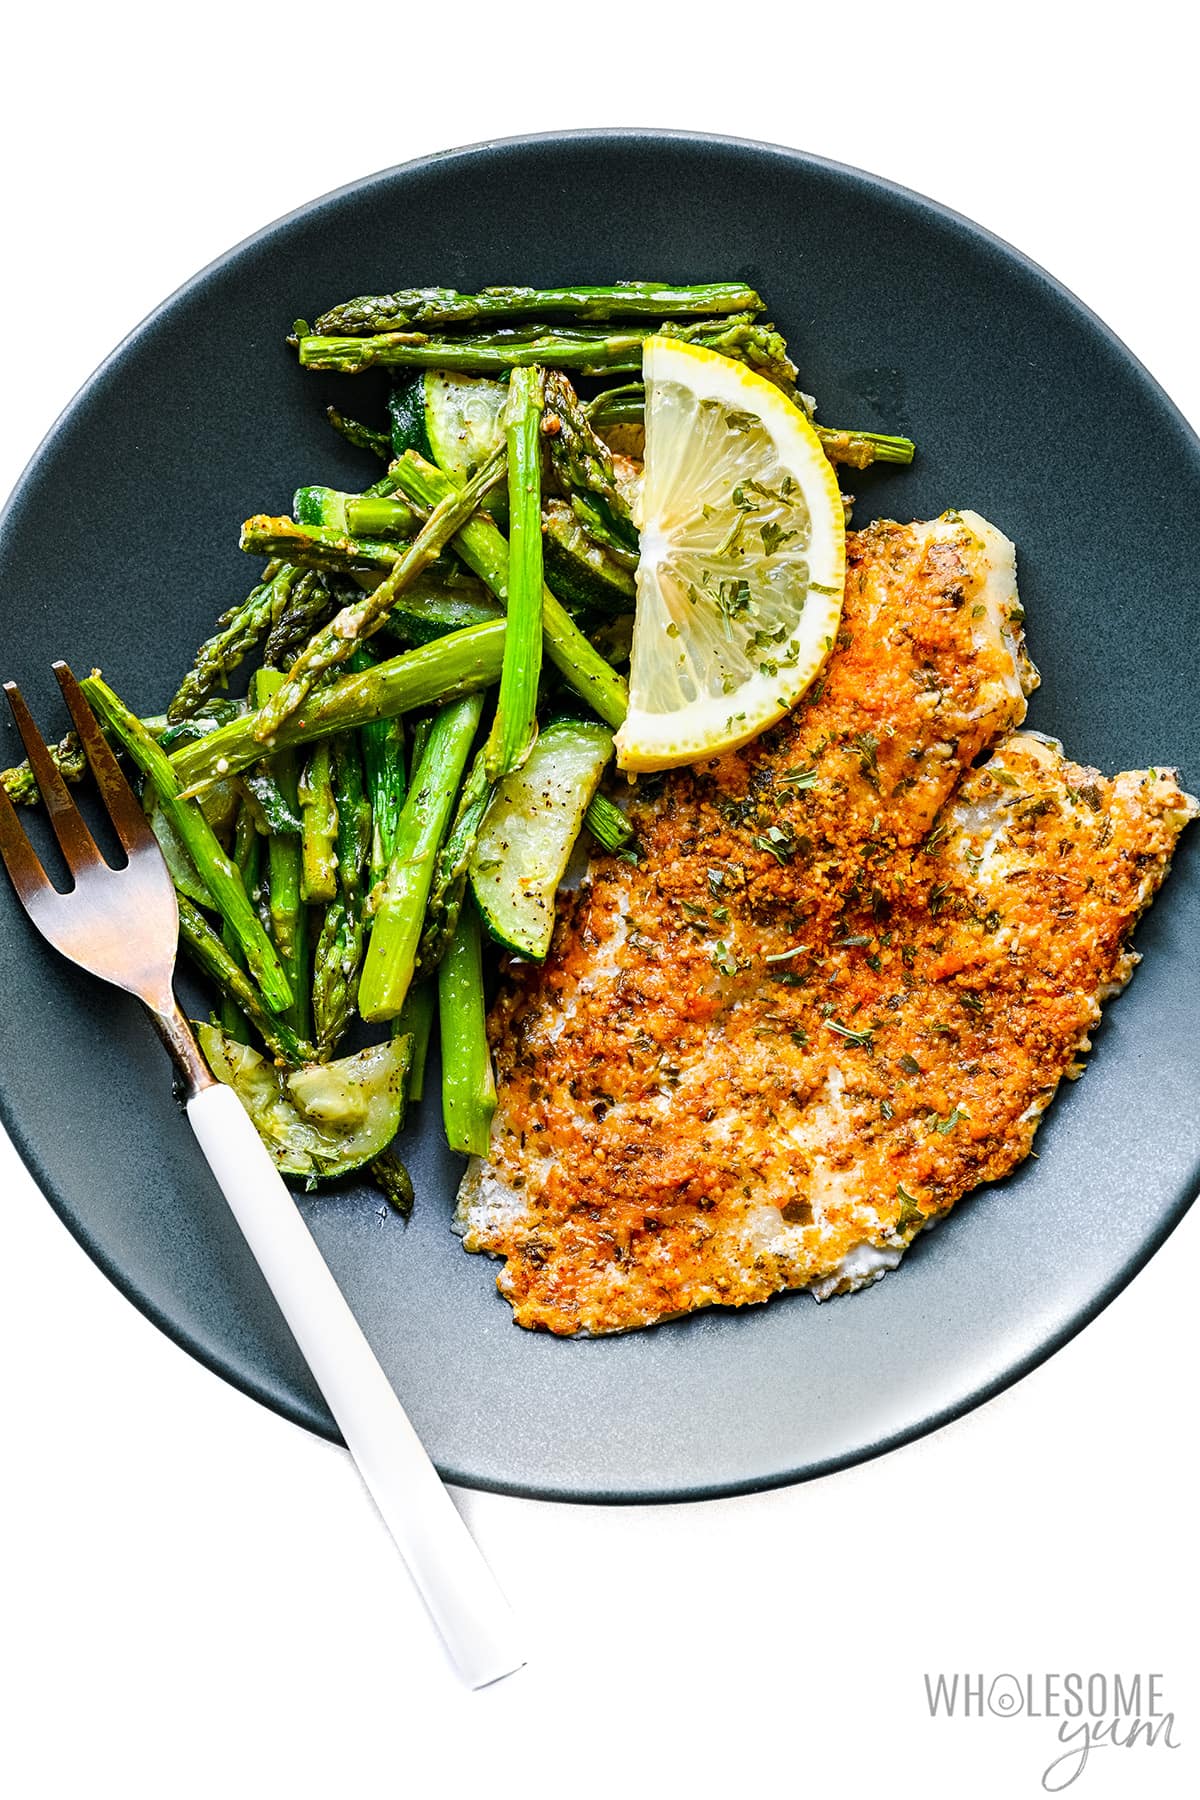 Parmesan tilapia on a plate with asparagus and zucchini.